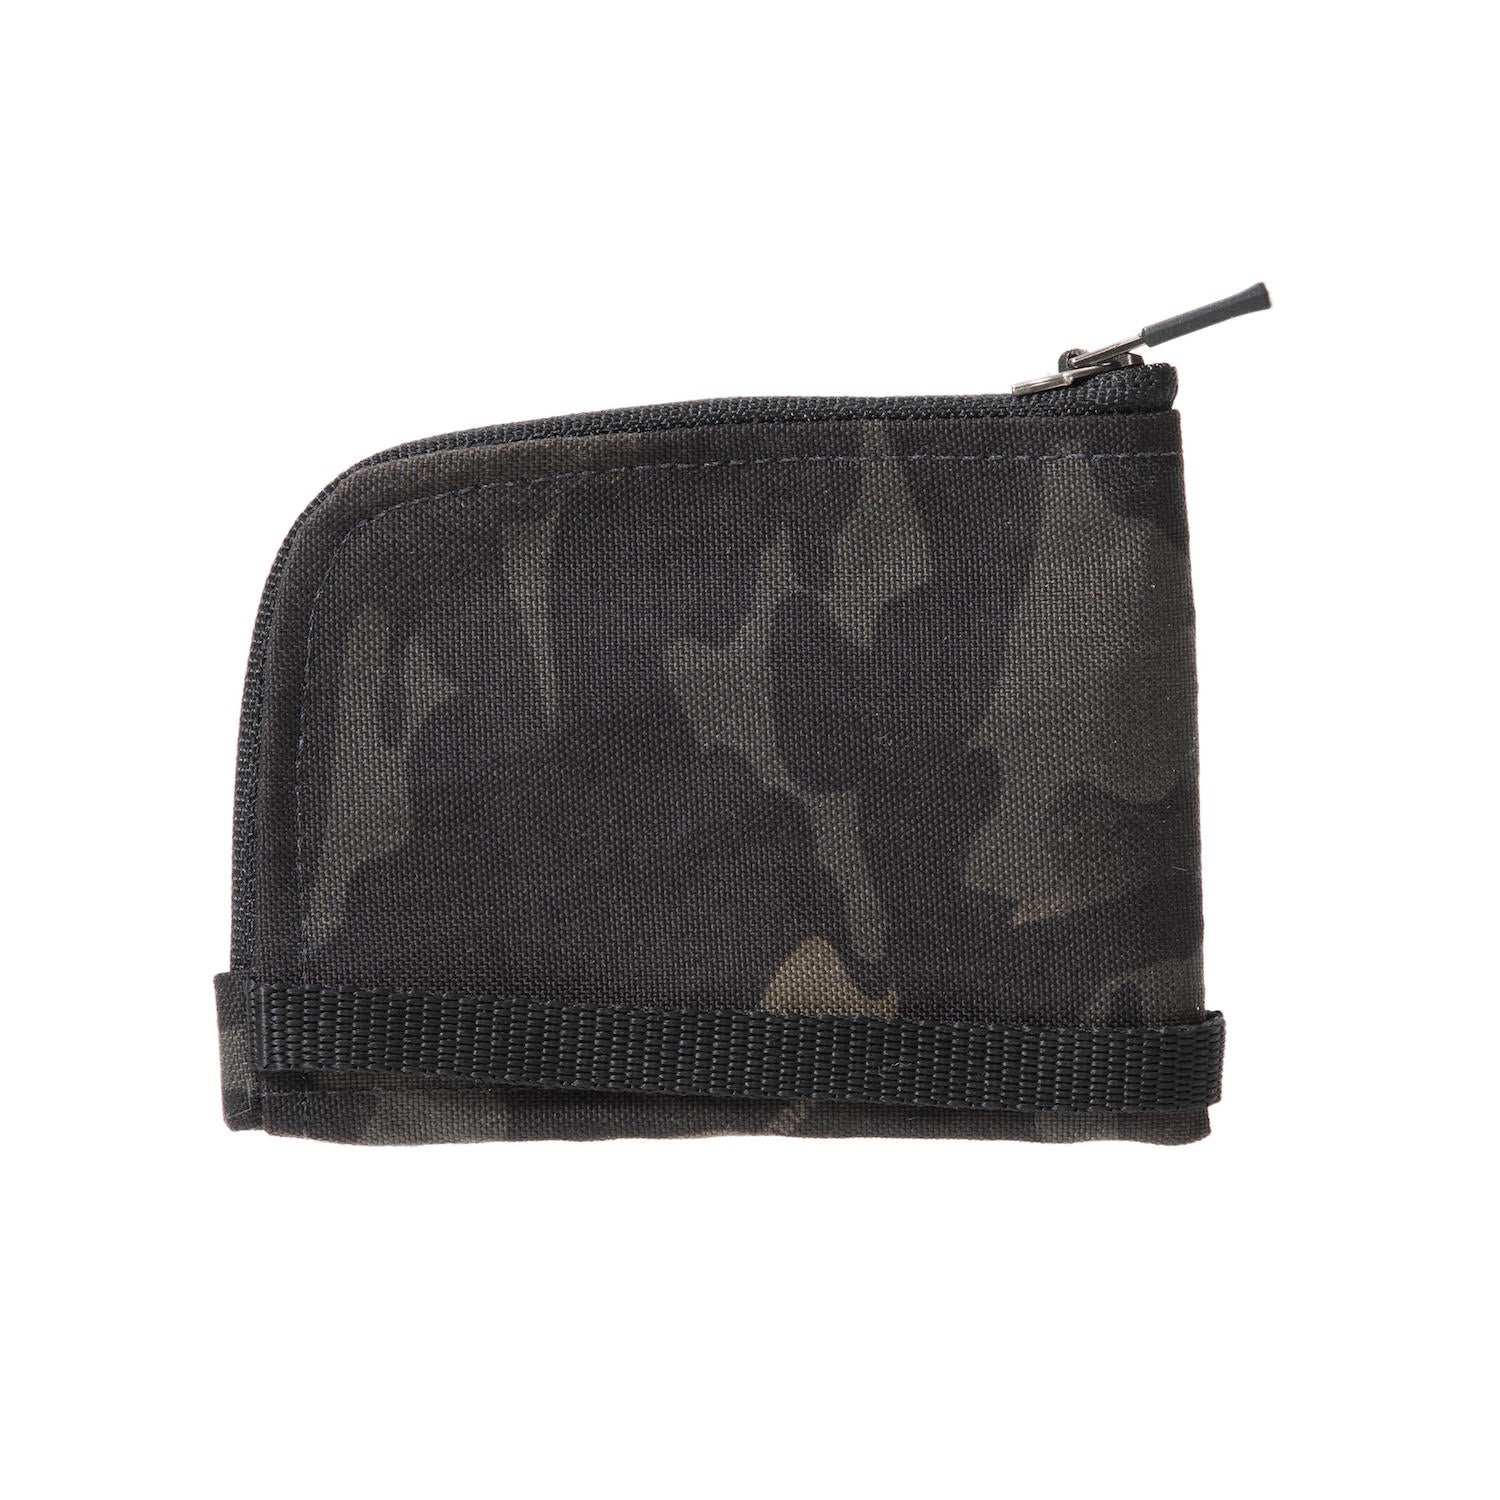 OUTER SHELL ADVENTURE Zip Wallet Compact